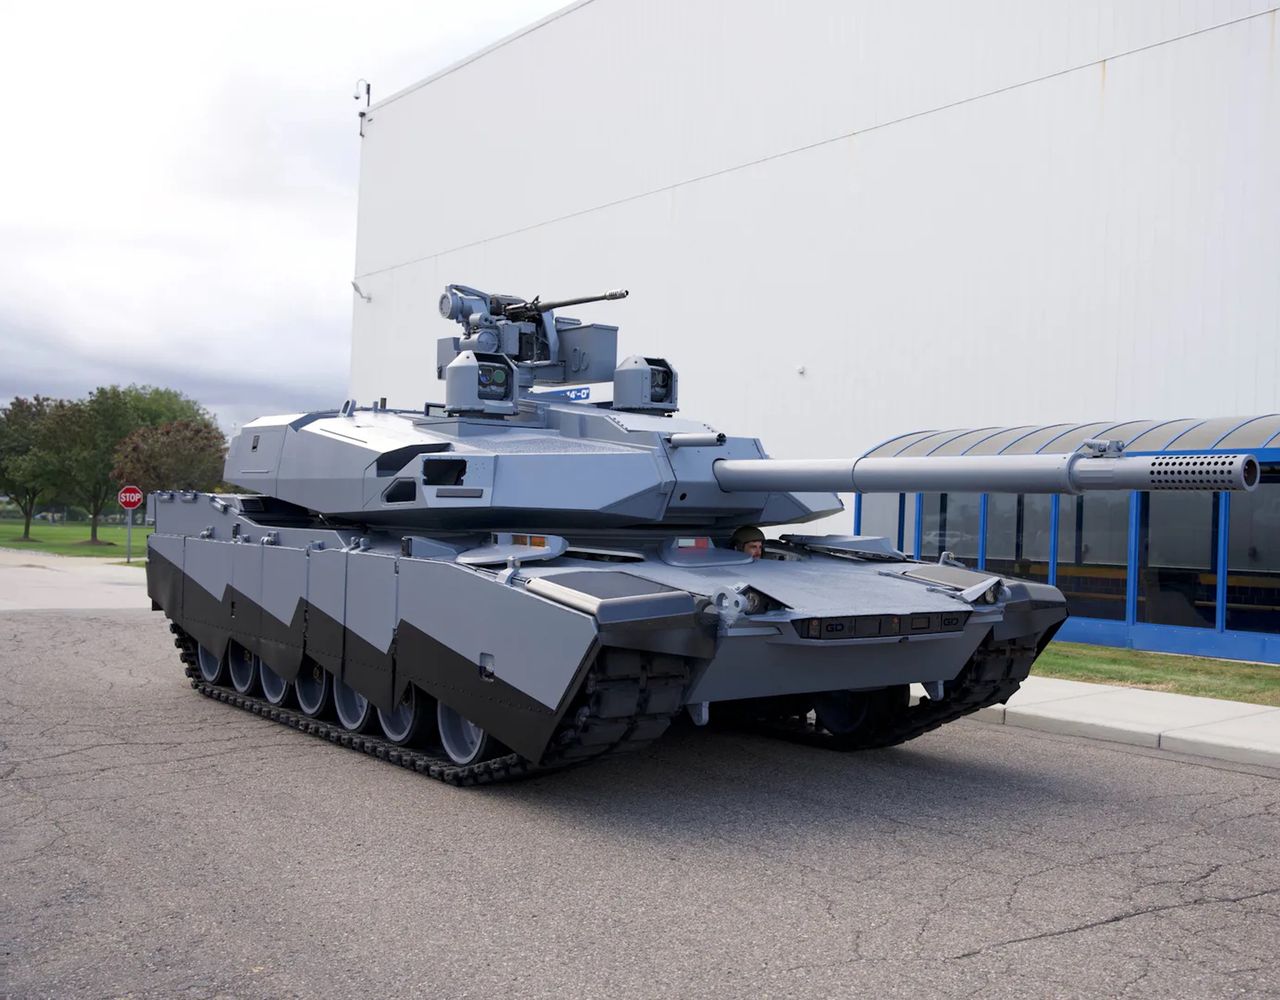 New Abrams tank set to revolutionize US Army armour by 2030